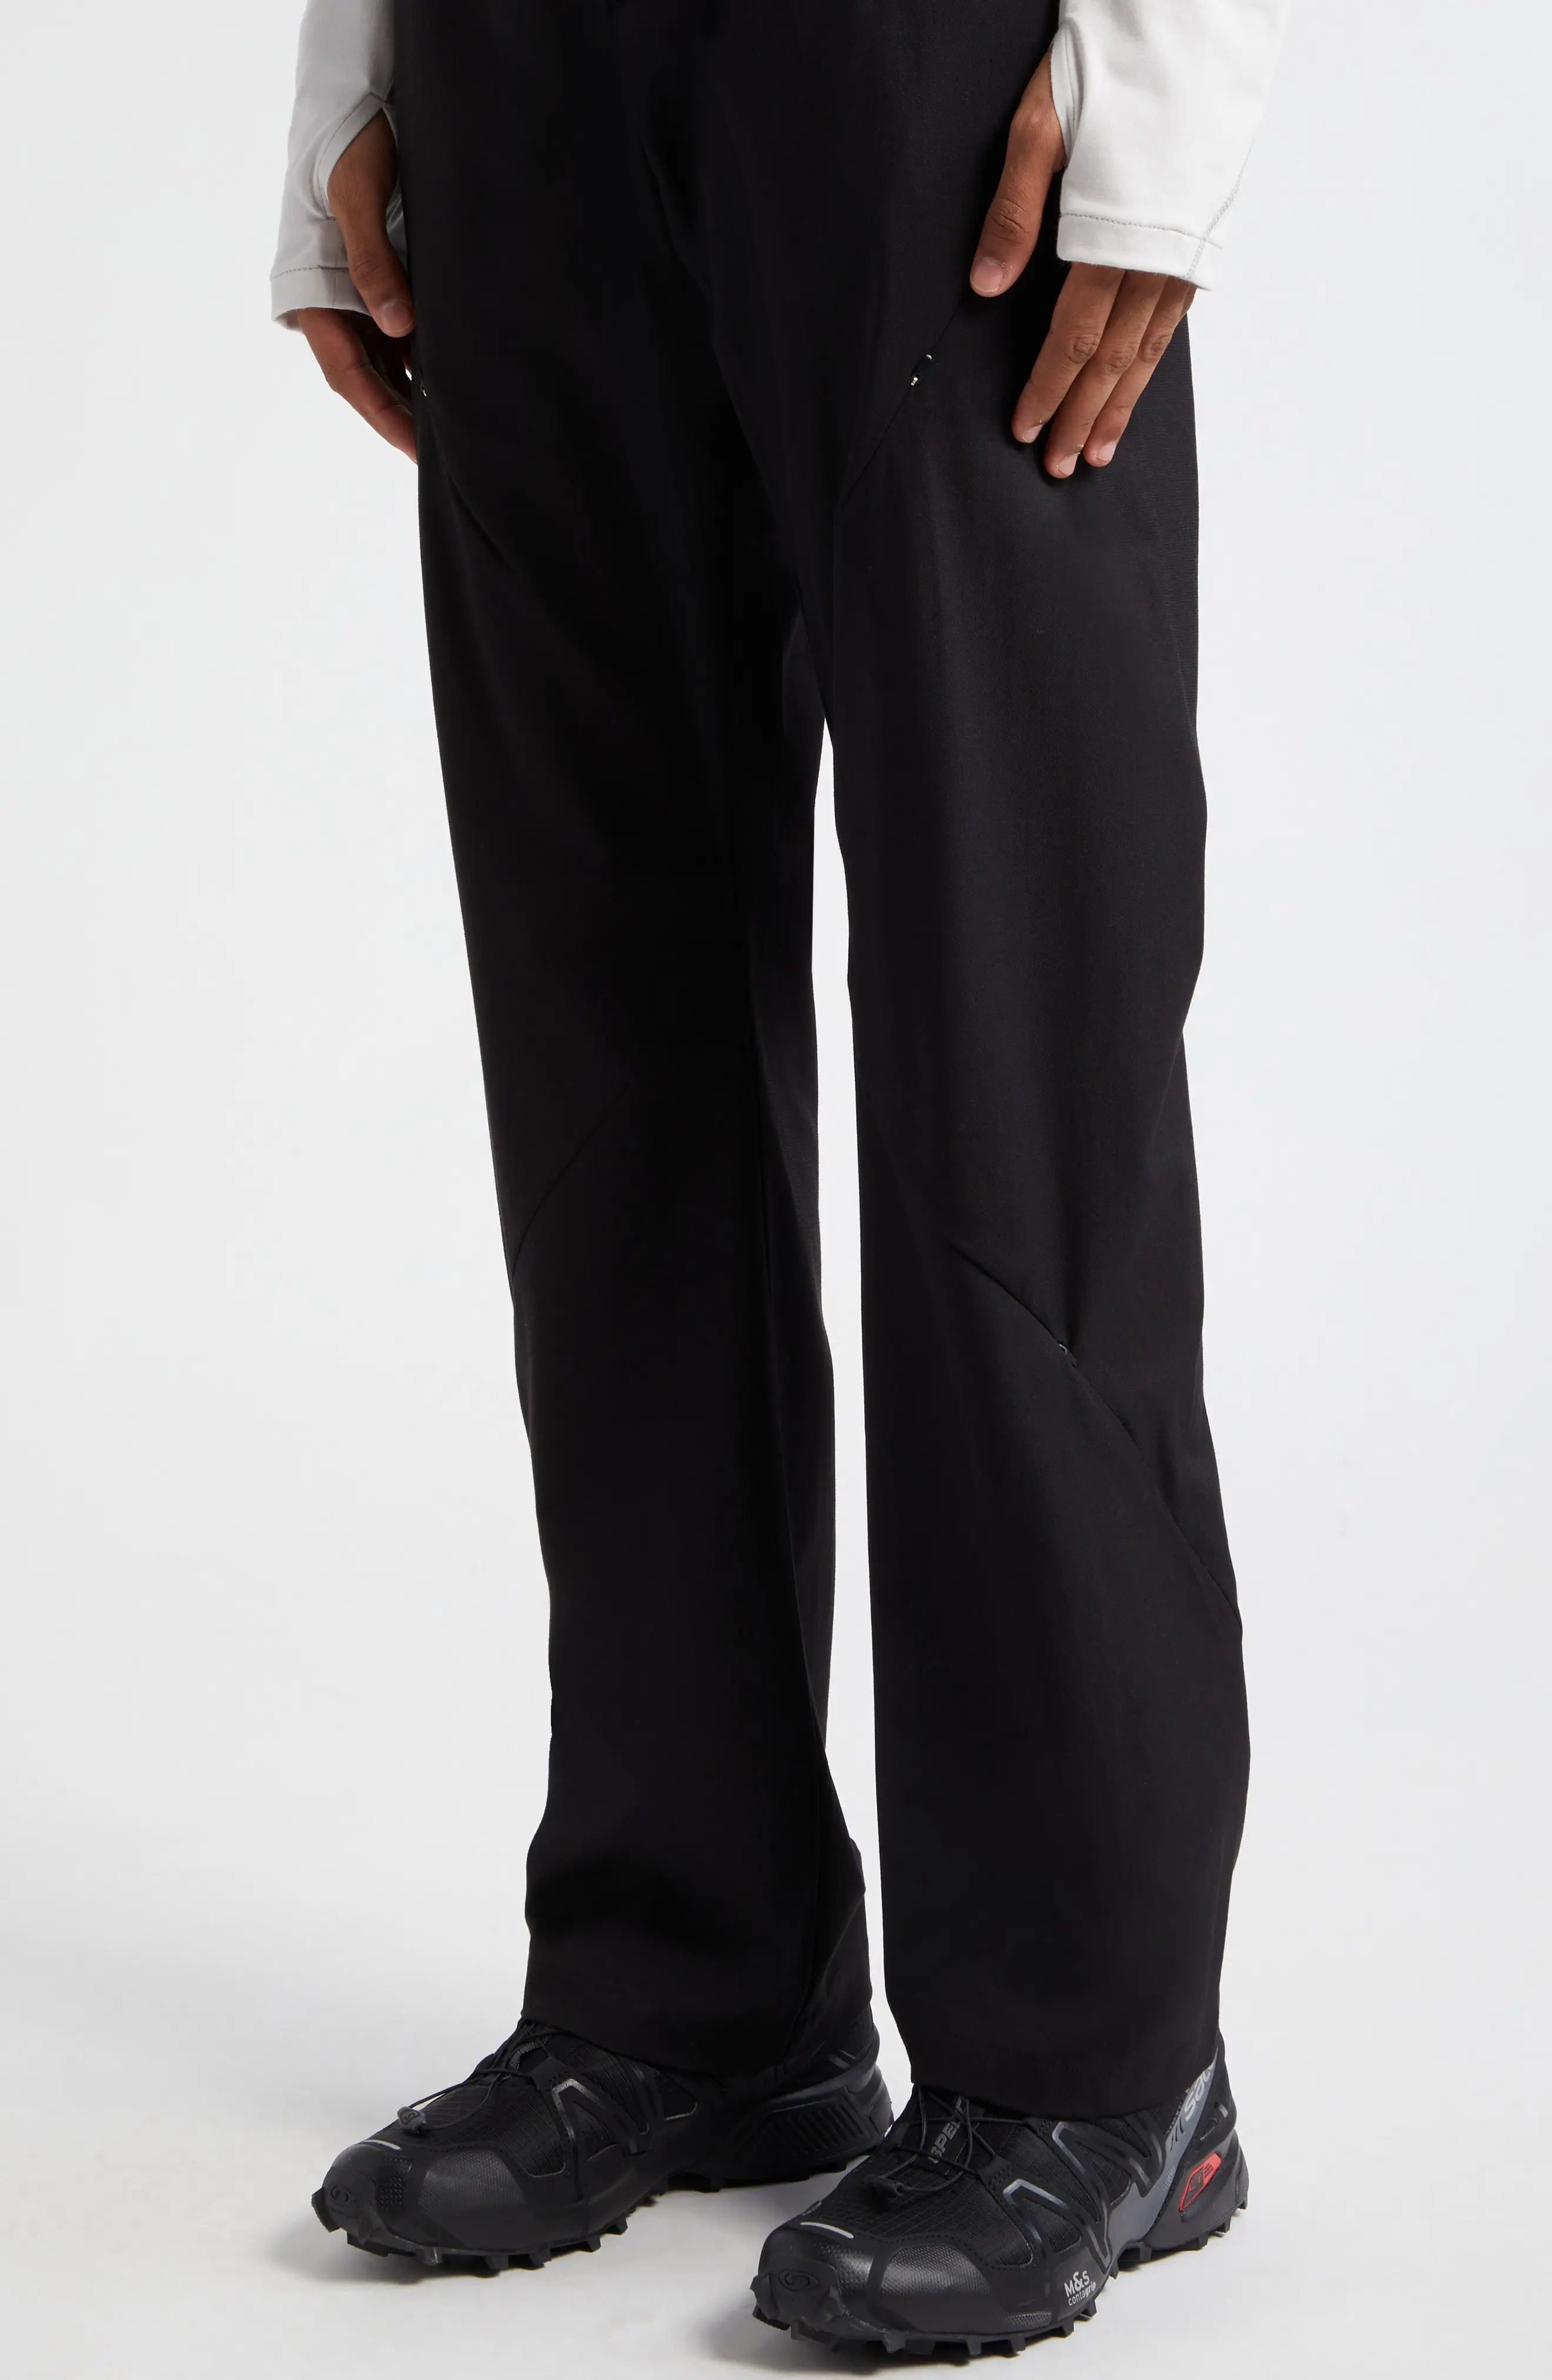 POST ARCHIVE FACTION (PAF) 5.1 Technical Pants | REVERSIBLE